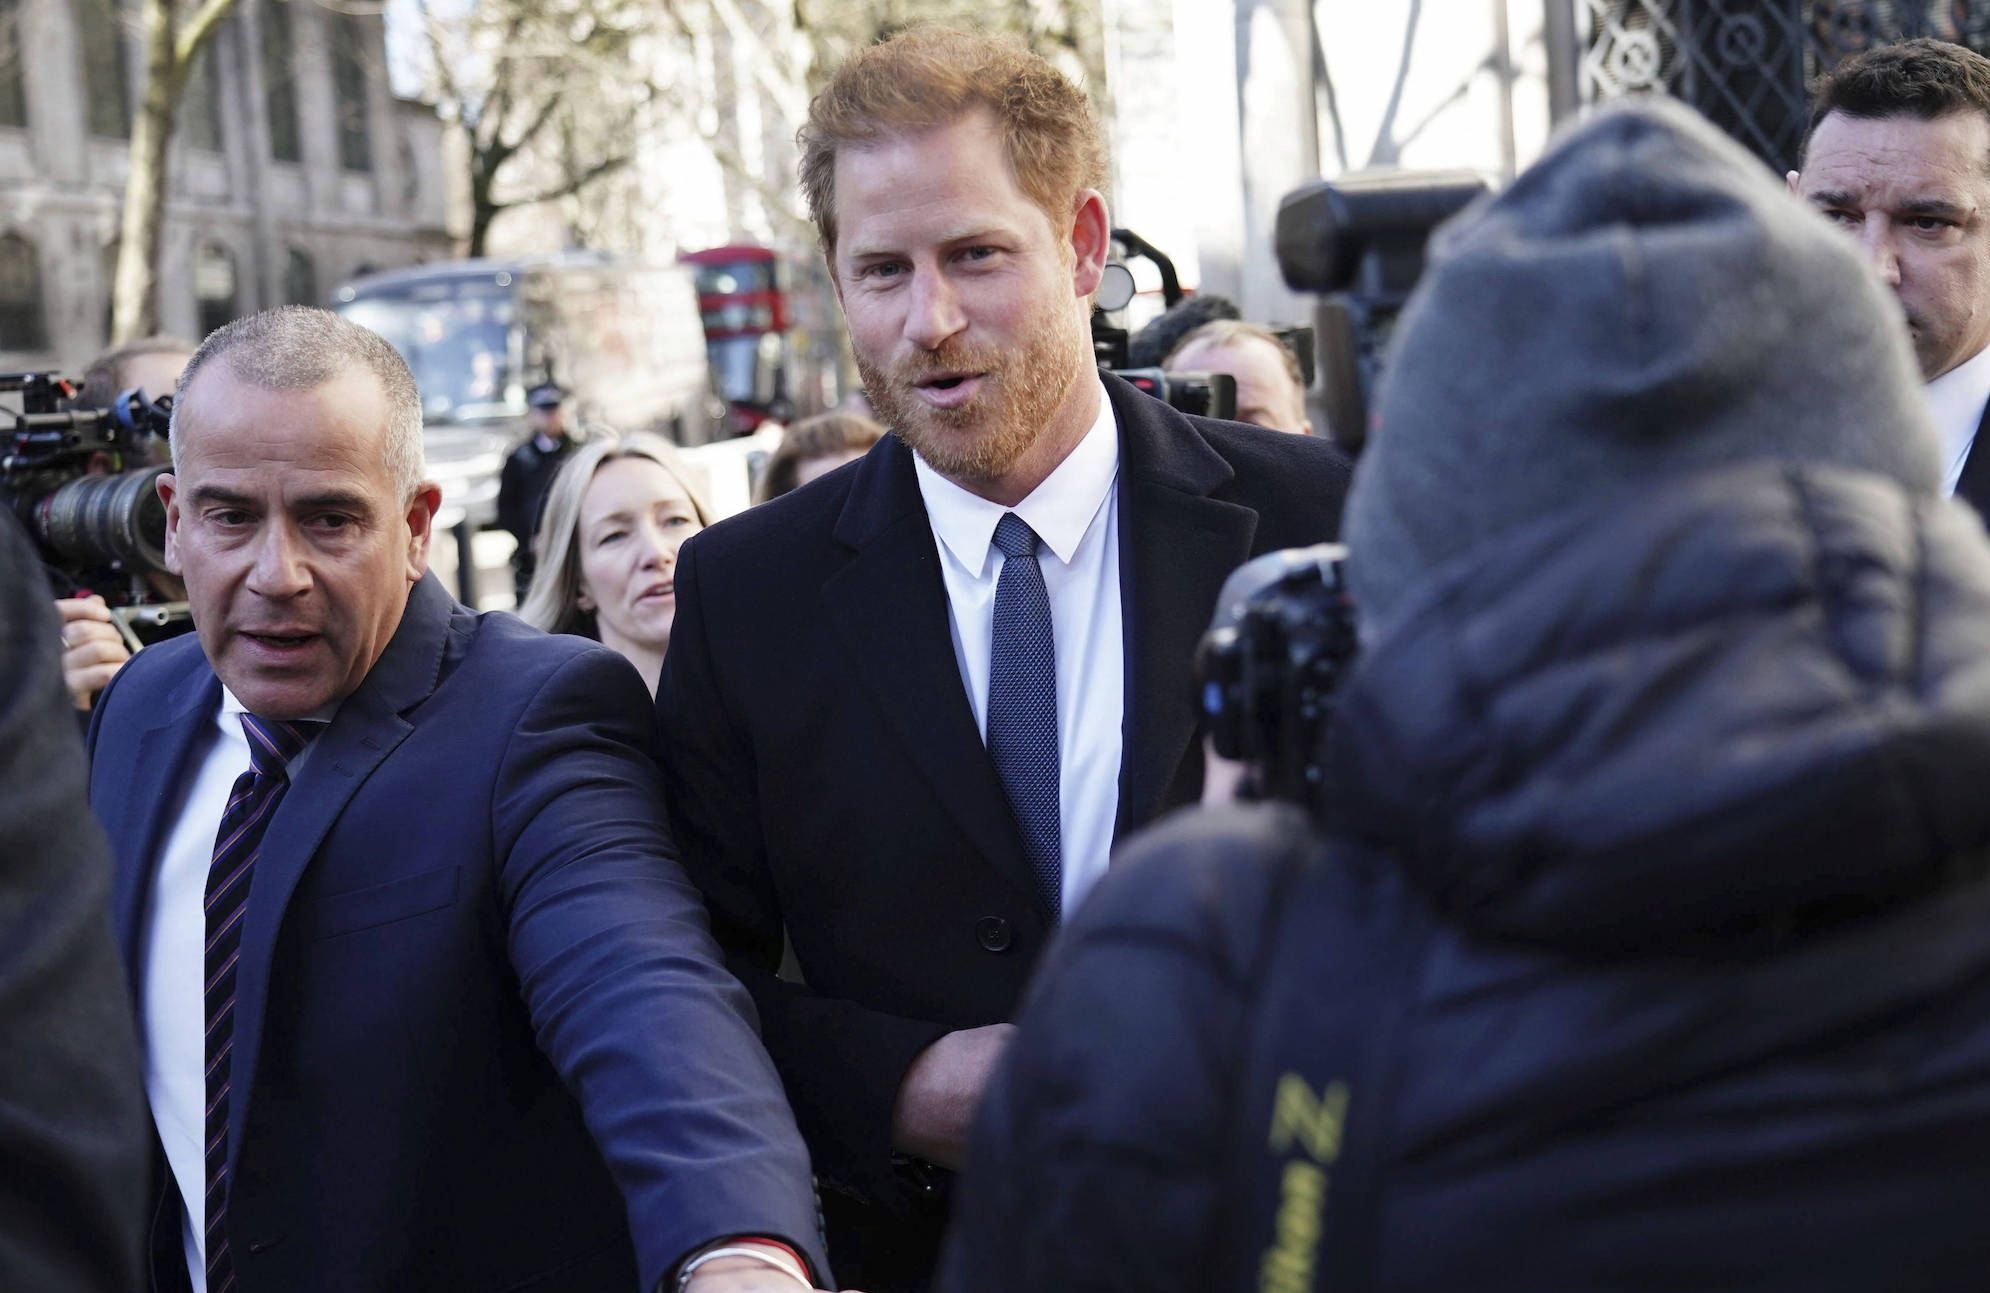 Prince Harry: his surprise visit to London